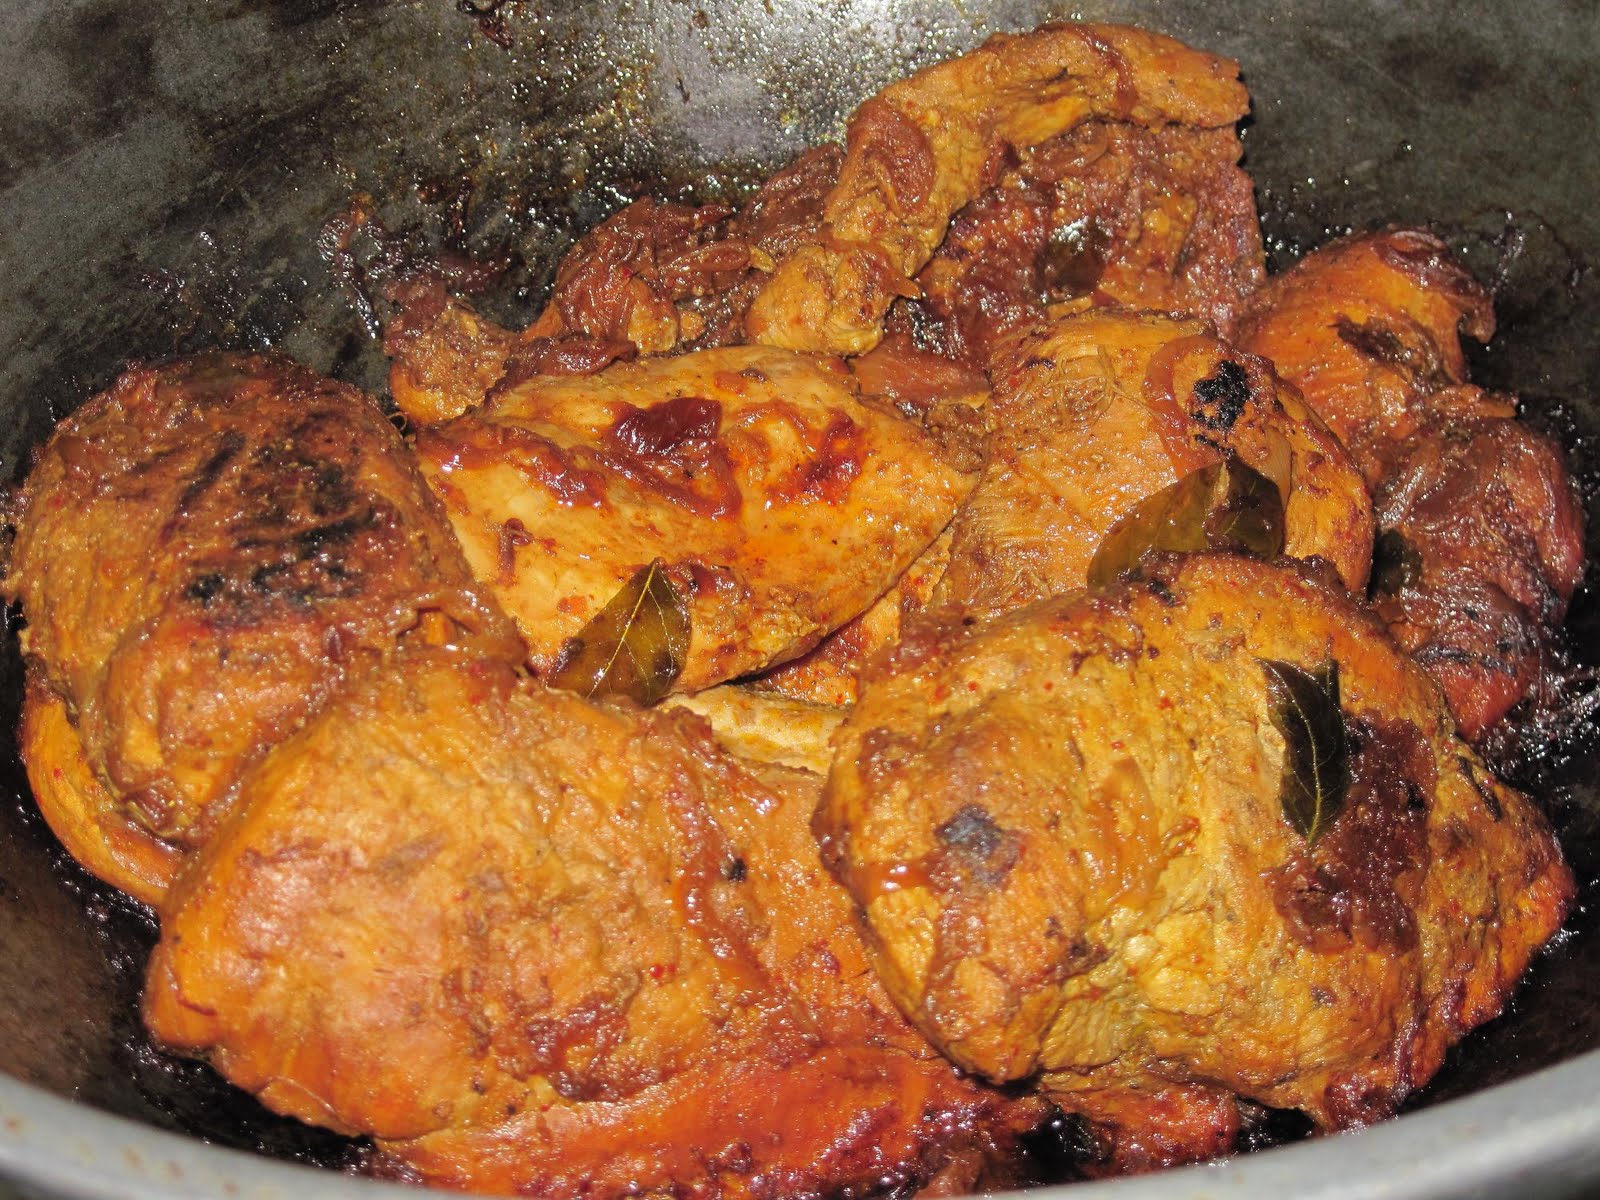 Kerala Syrian Christian Cuisine: Fusion cooking / boneless Chicken in ...